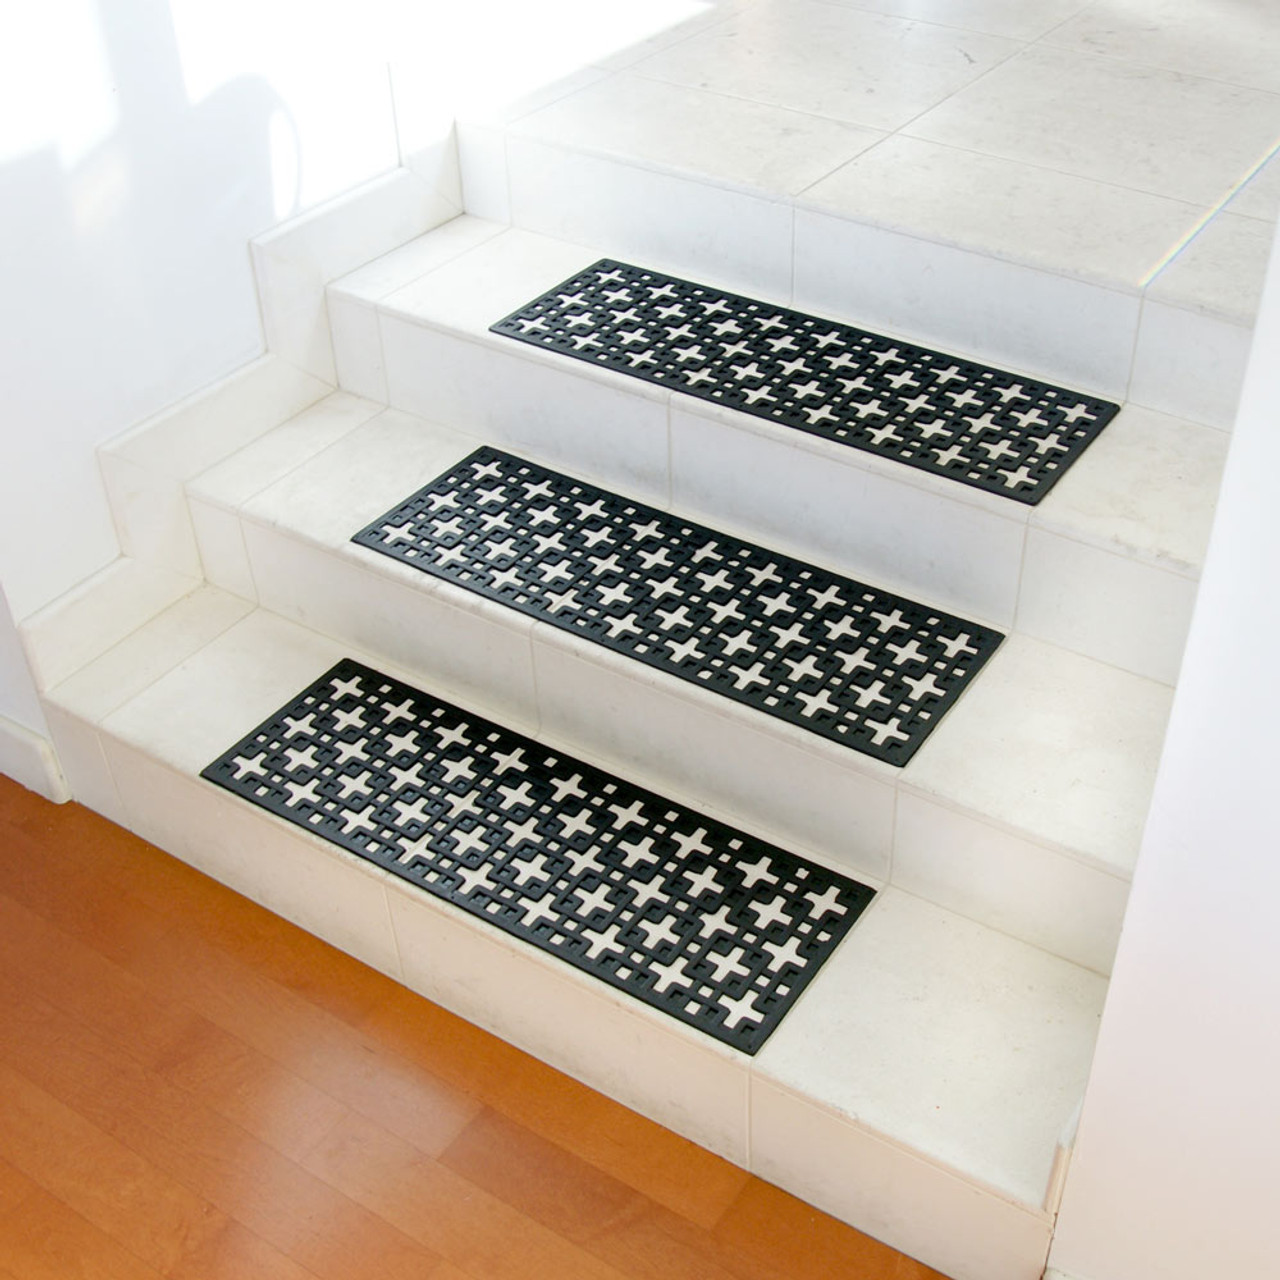 jxgzyy Set of 5 Rubber Stair Treads Outdoor Indoor Mats 75 x 25cm Non-Slip Step Stair Pads Entrance Mat for Home or Commercial Use Black 